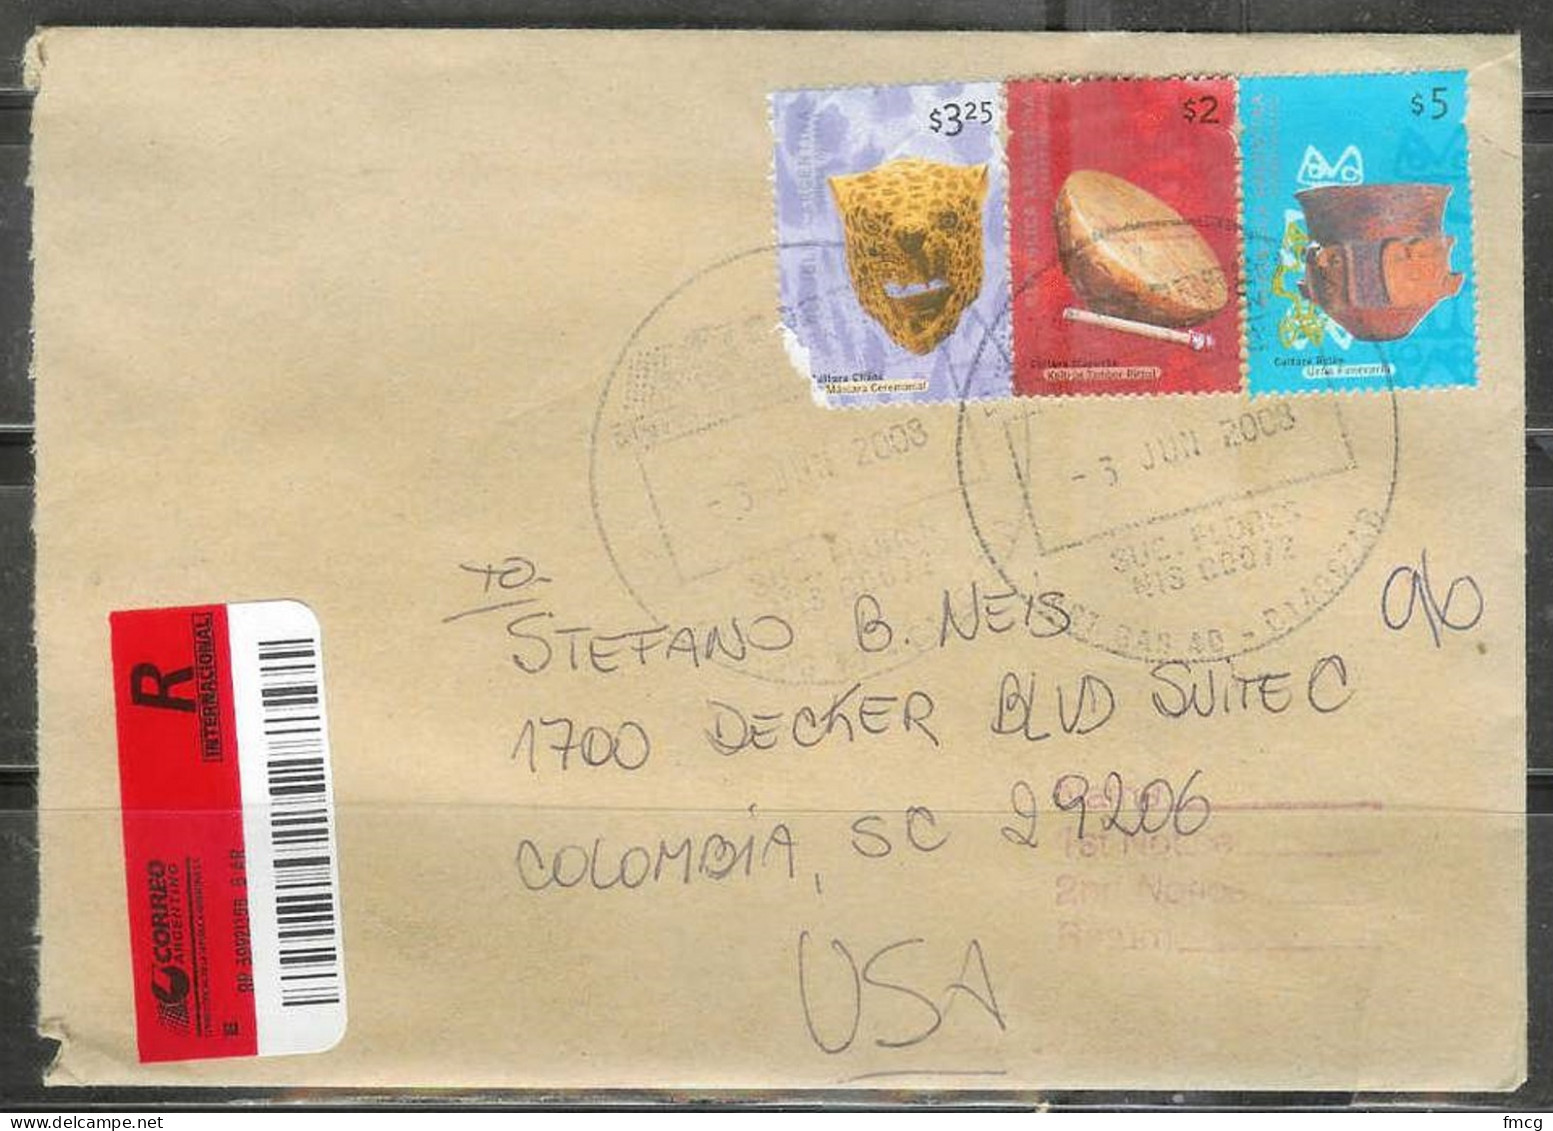 2008 Argentina Registered Cover To USA, $5, $3 And $3.25 Stamps - Covers & Documents